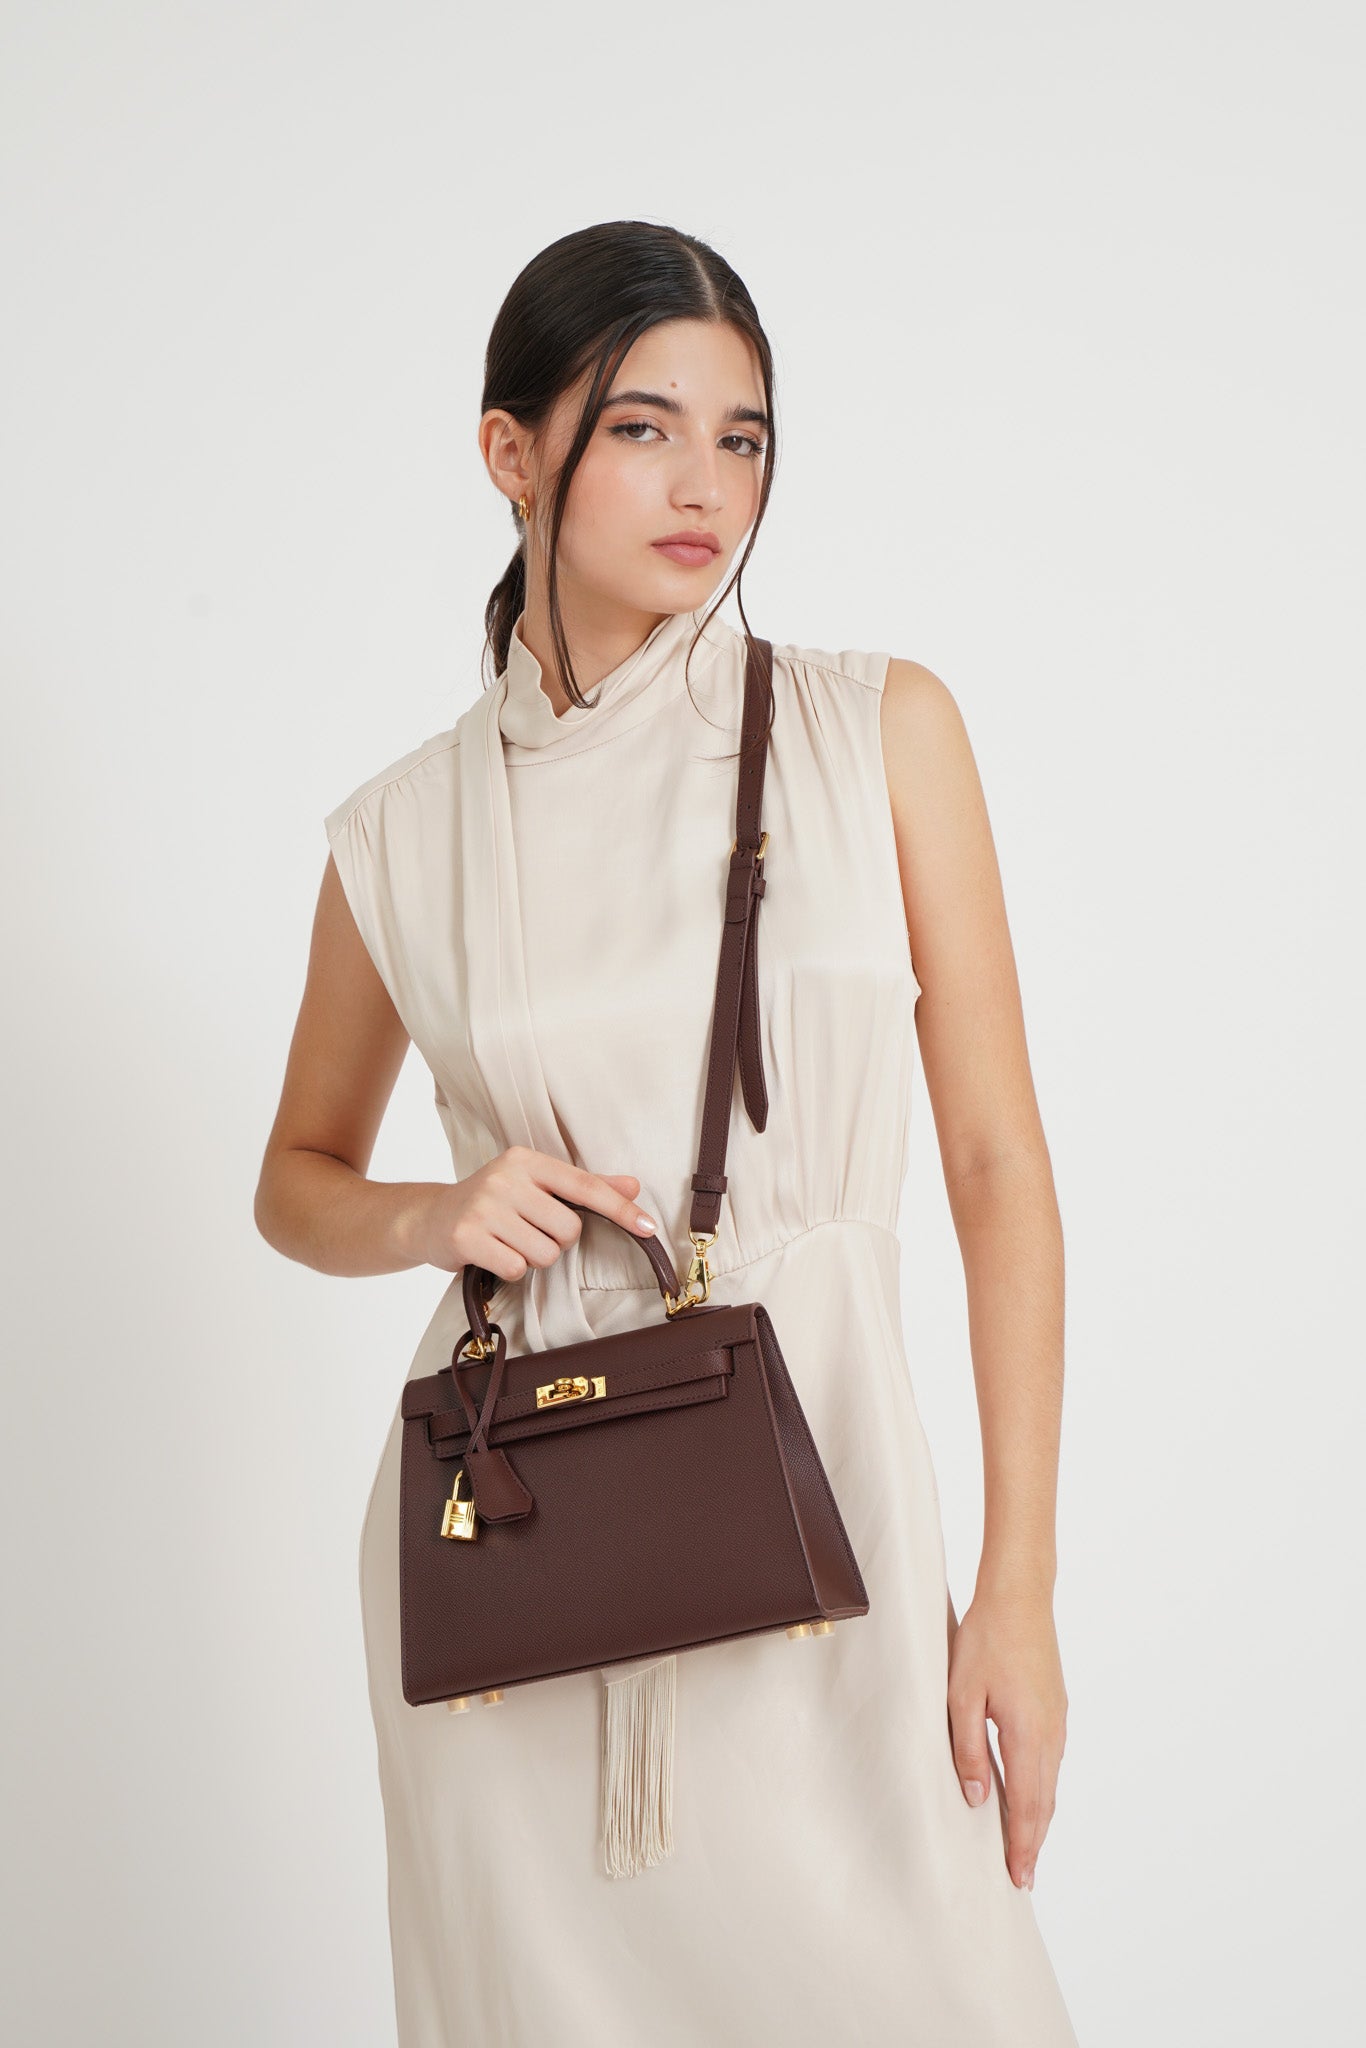 The Grace 25 Satchel Epsom Leather in Etoupe GHW by The Look